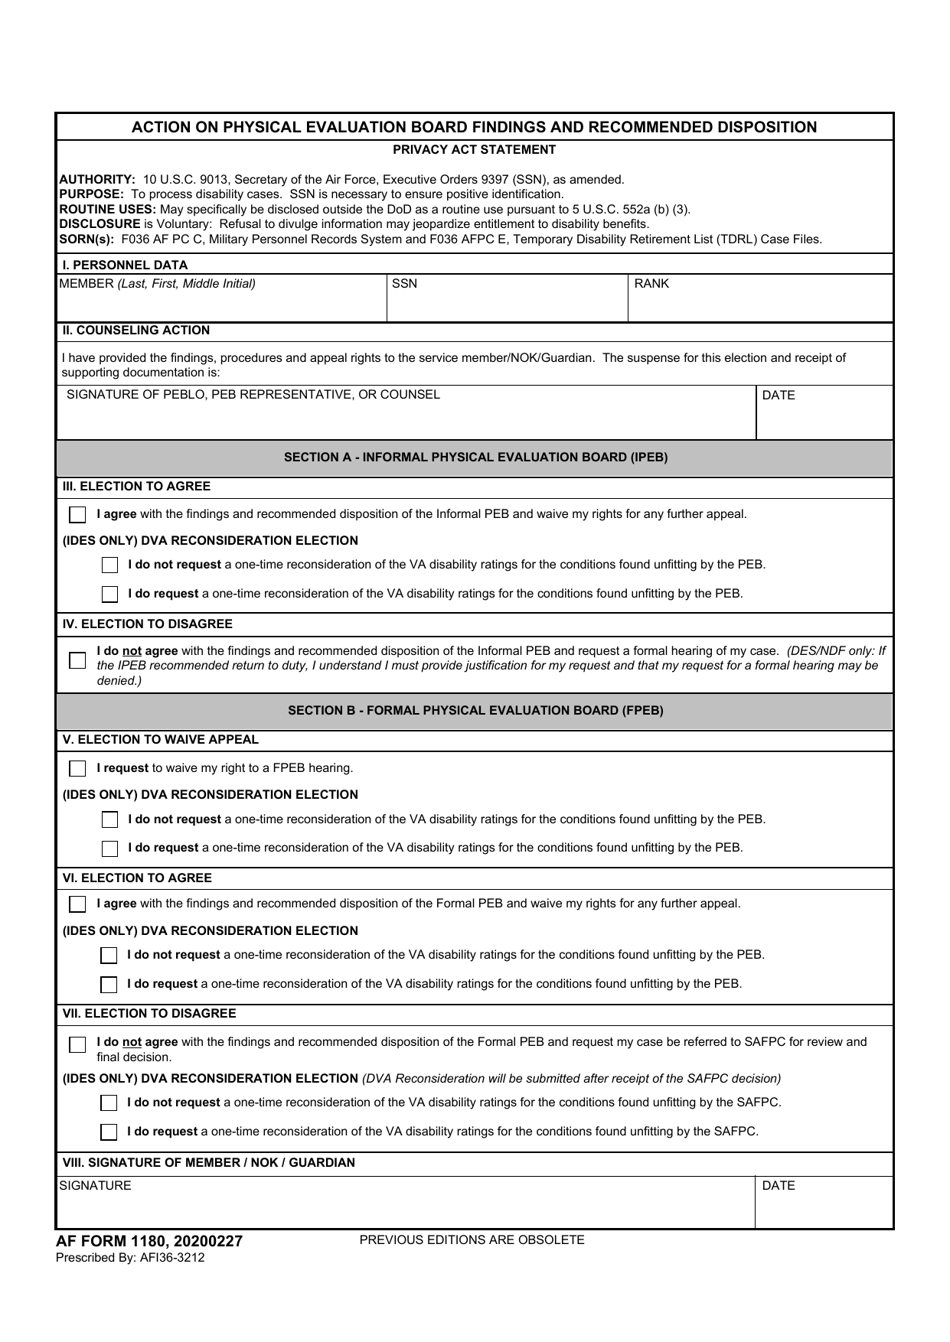 AF Form 1180 Action on Physical Evaluation Board Findings and Recommended Disposition, Page 1